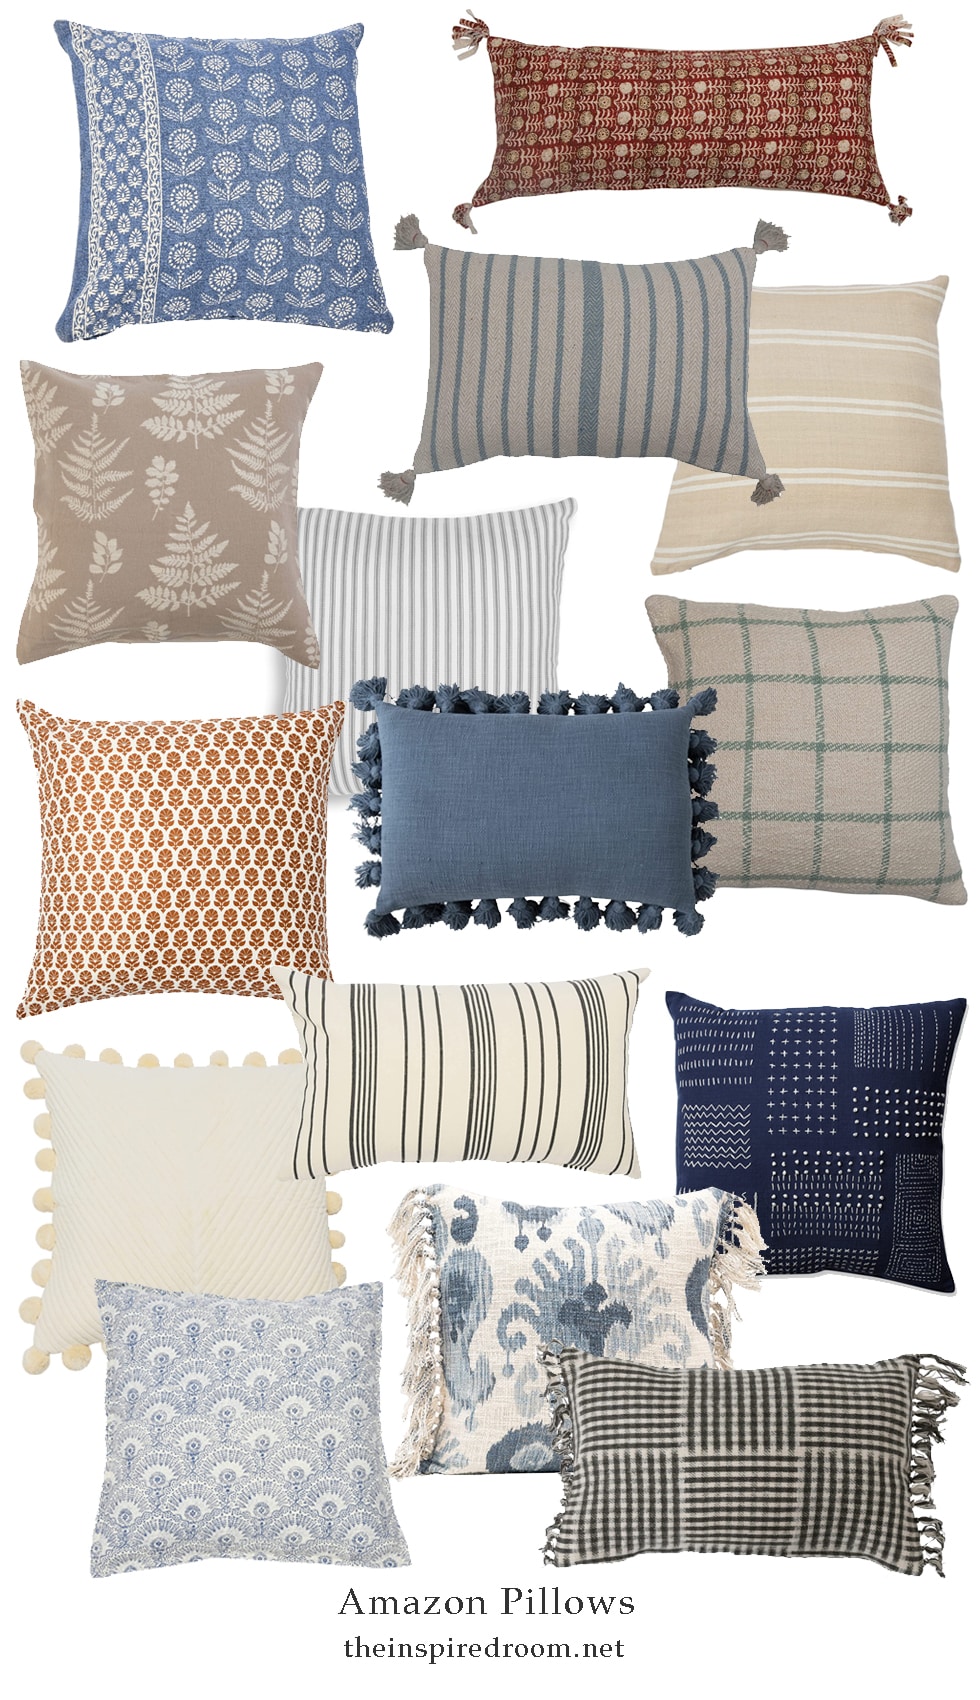 The Ultimate Decorative Pillows Roundup + 9 Pretty Pillow Pairing Combinations!